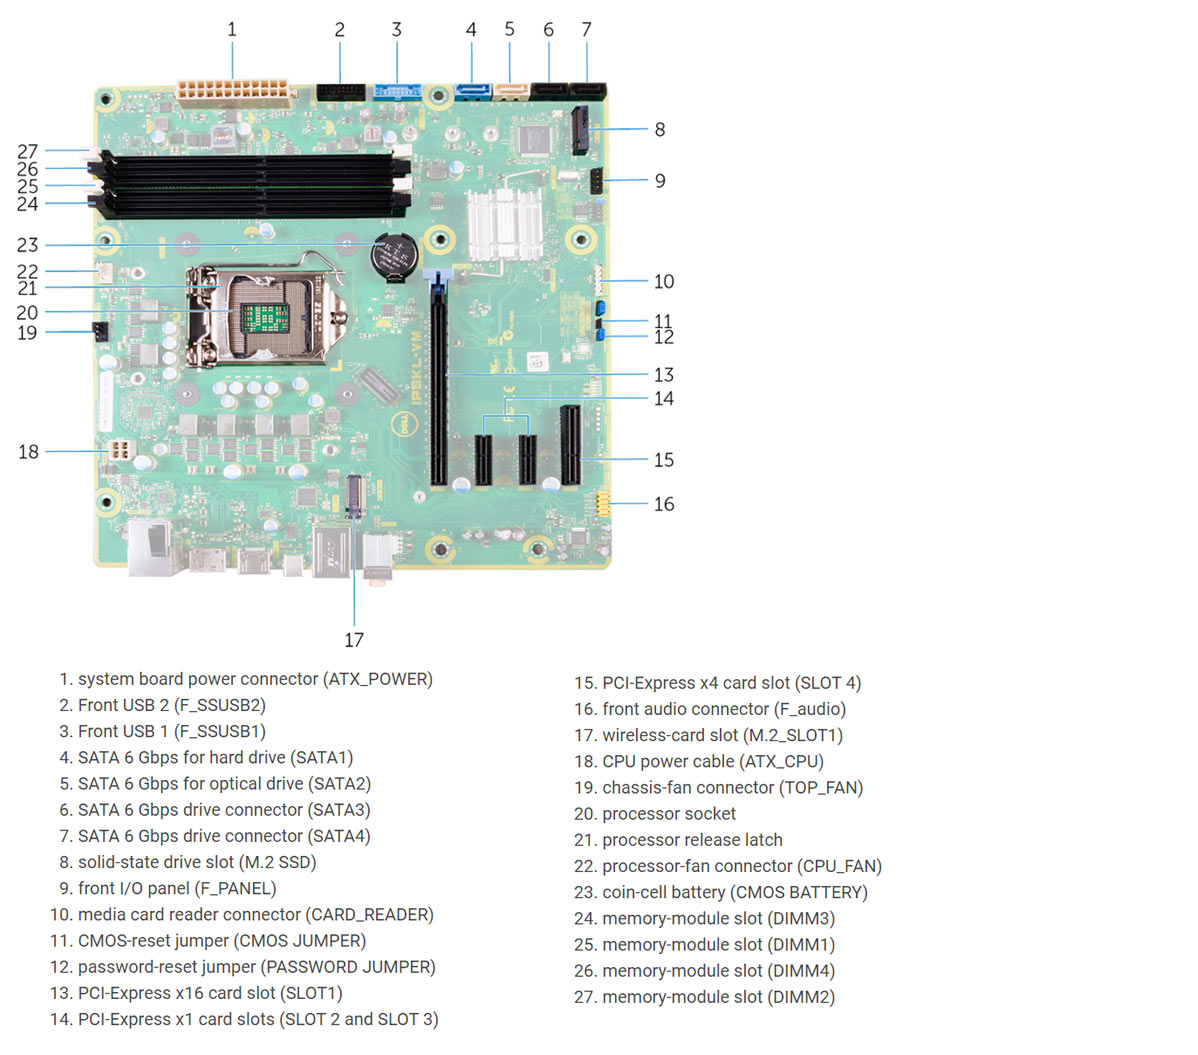 Dell_XPS_8930_motherboard.jpg motherboard layout